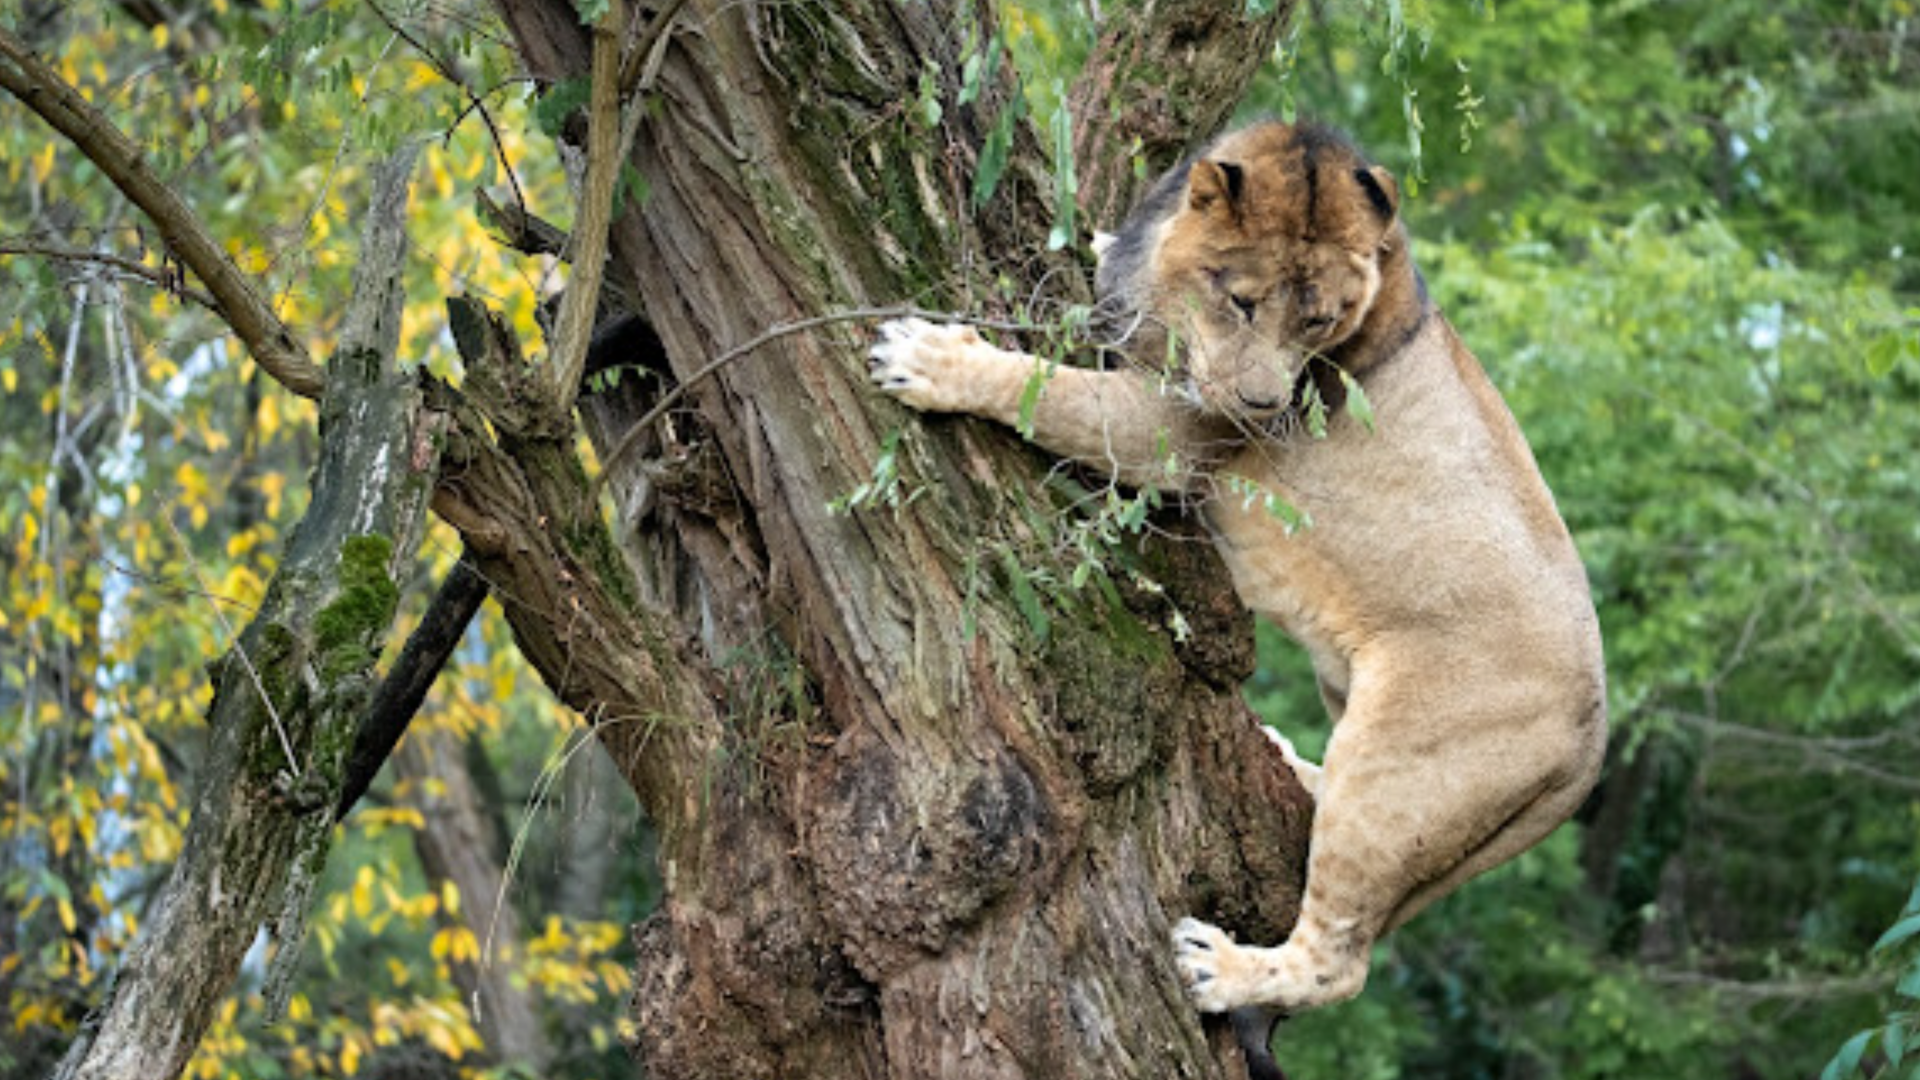 A lion clinging to a tree and looking over its shoulder.